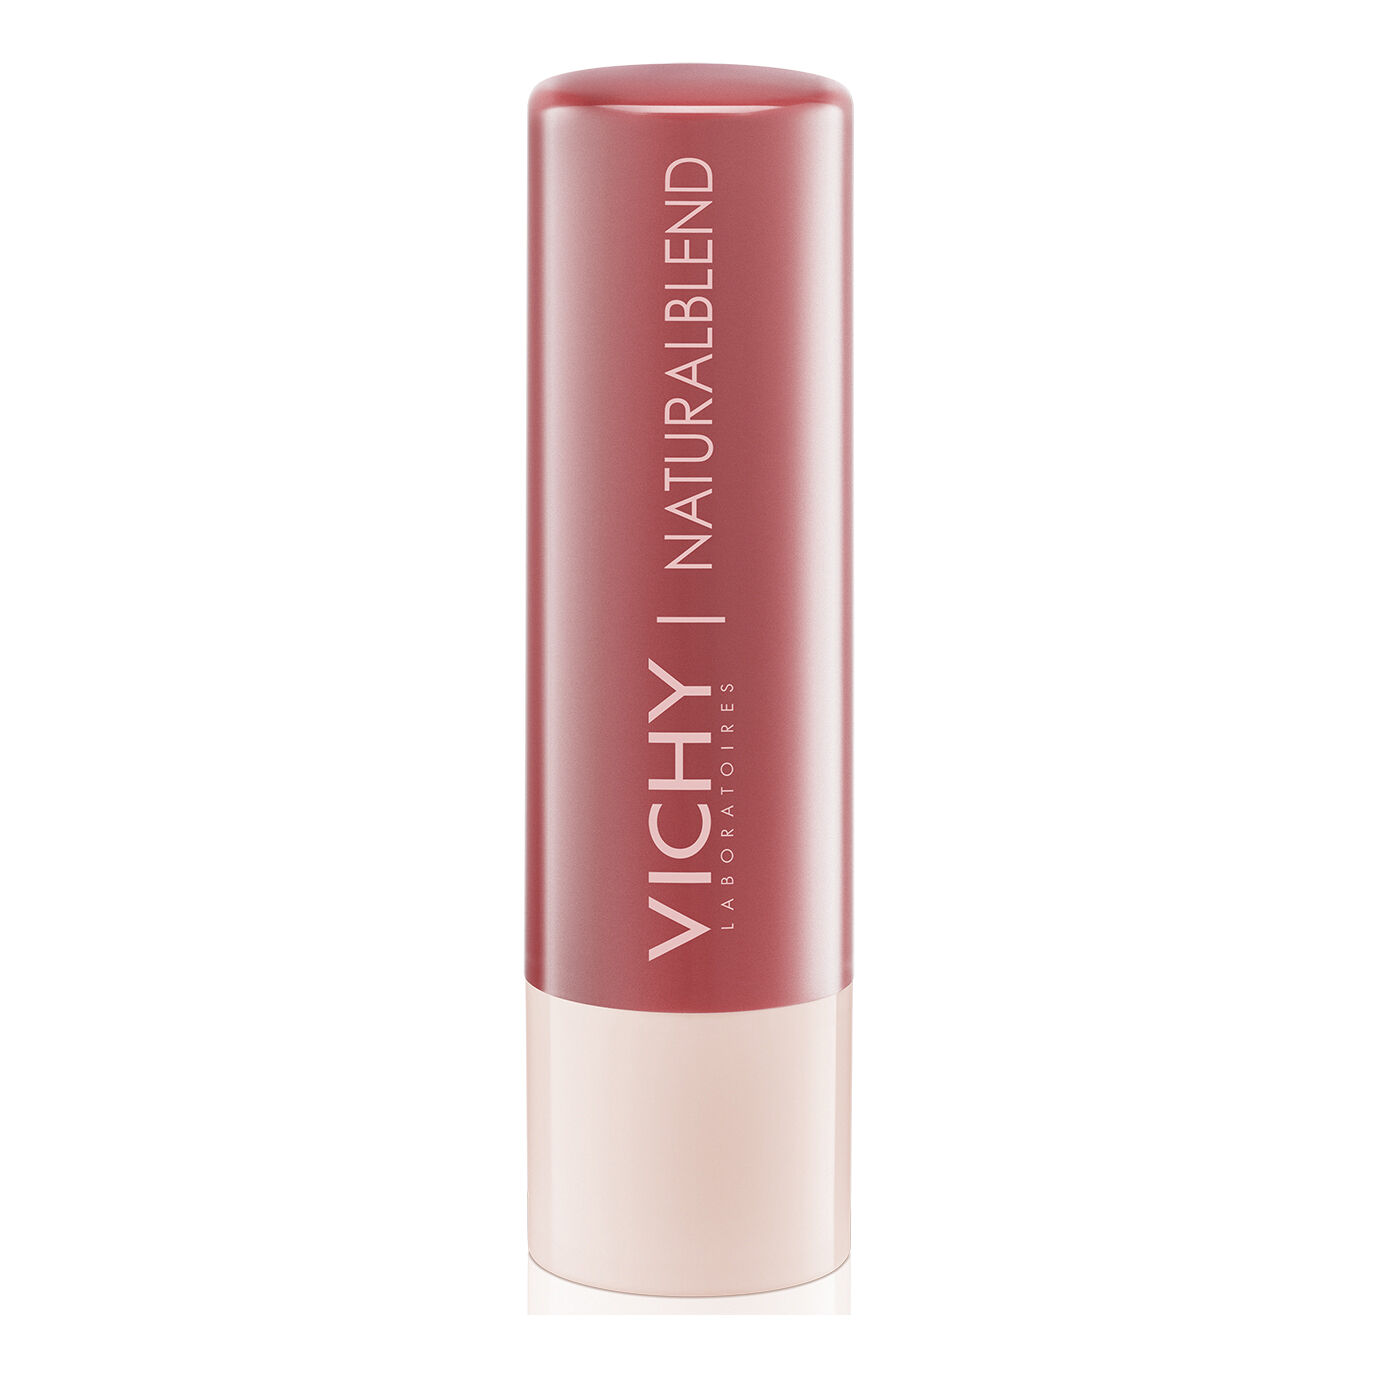 Vichy Natural blend lips nude 4,5g